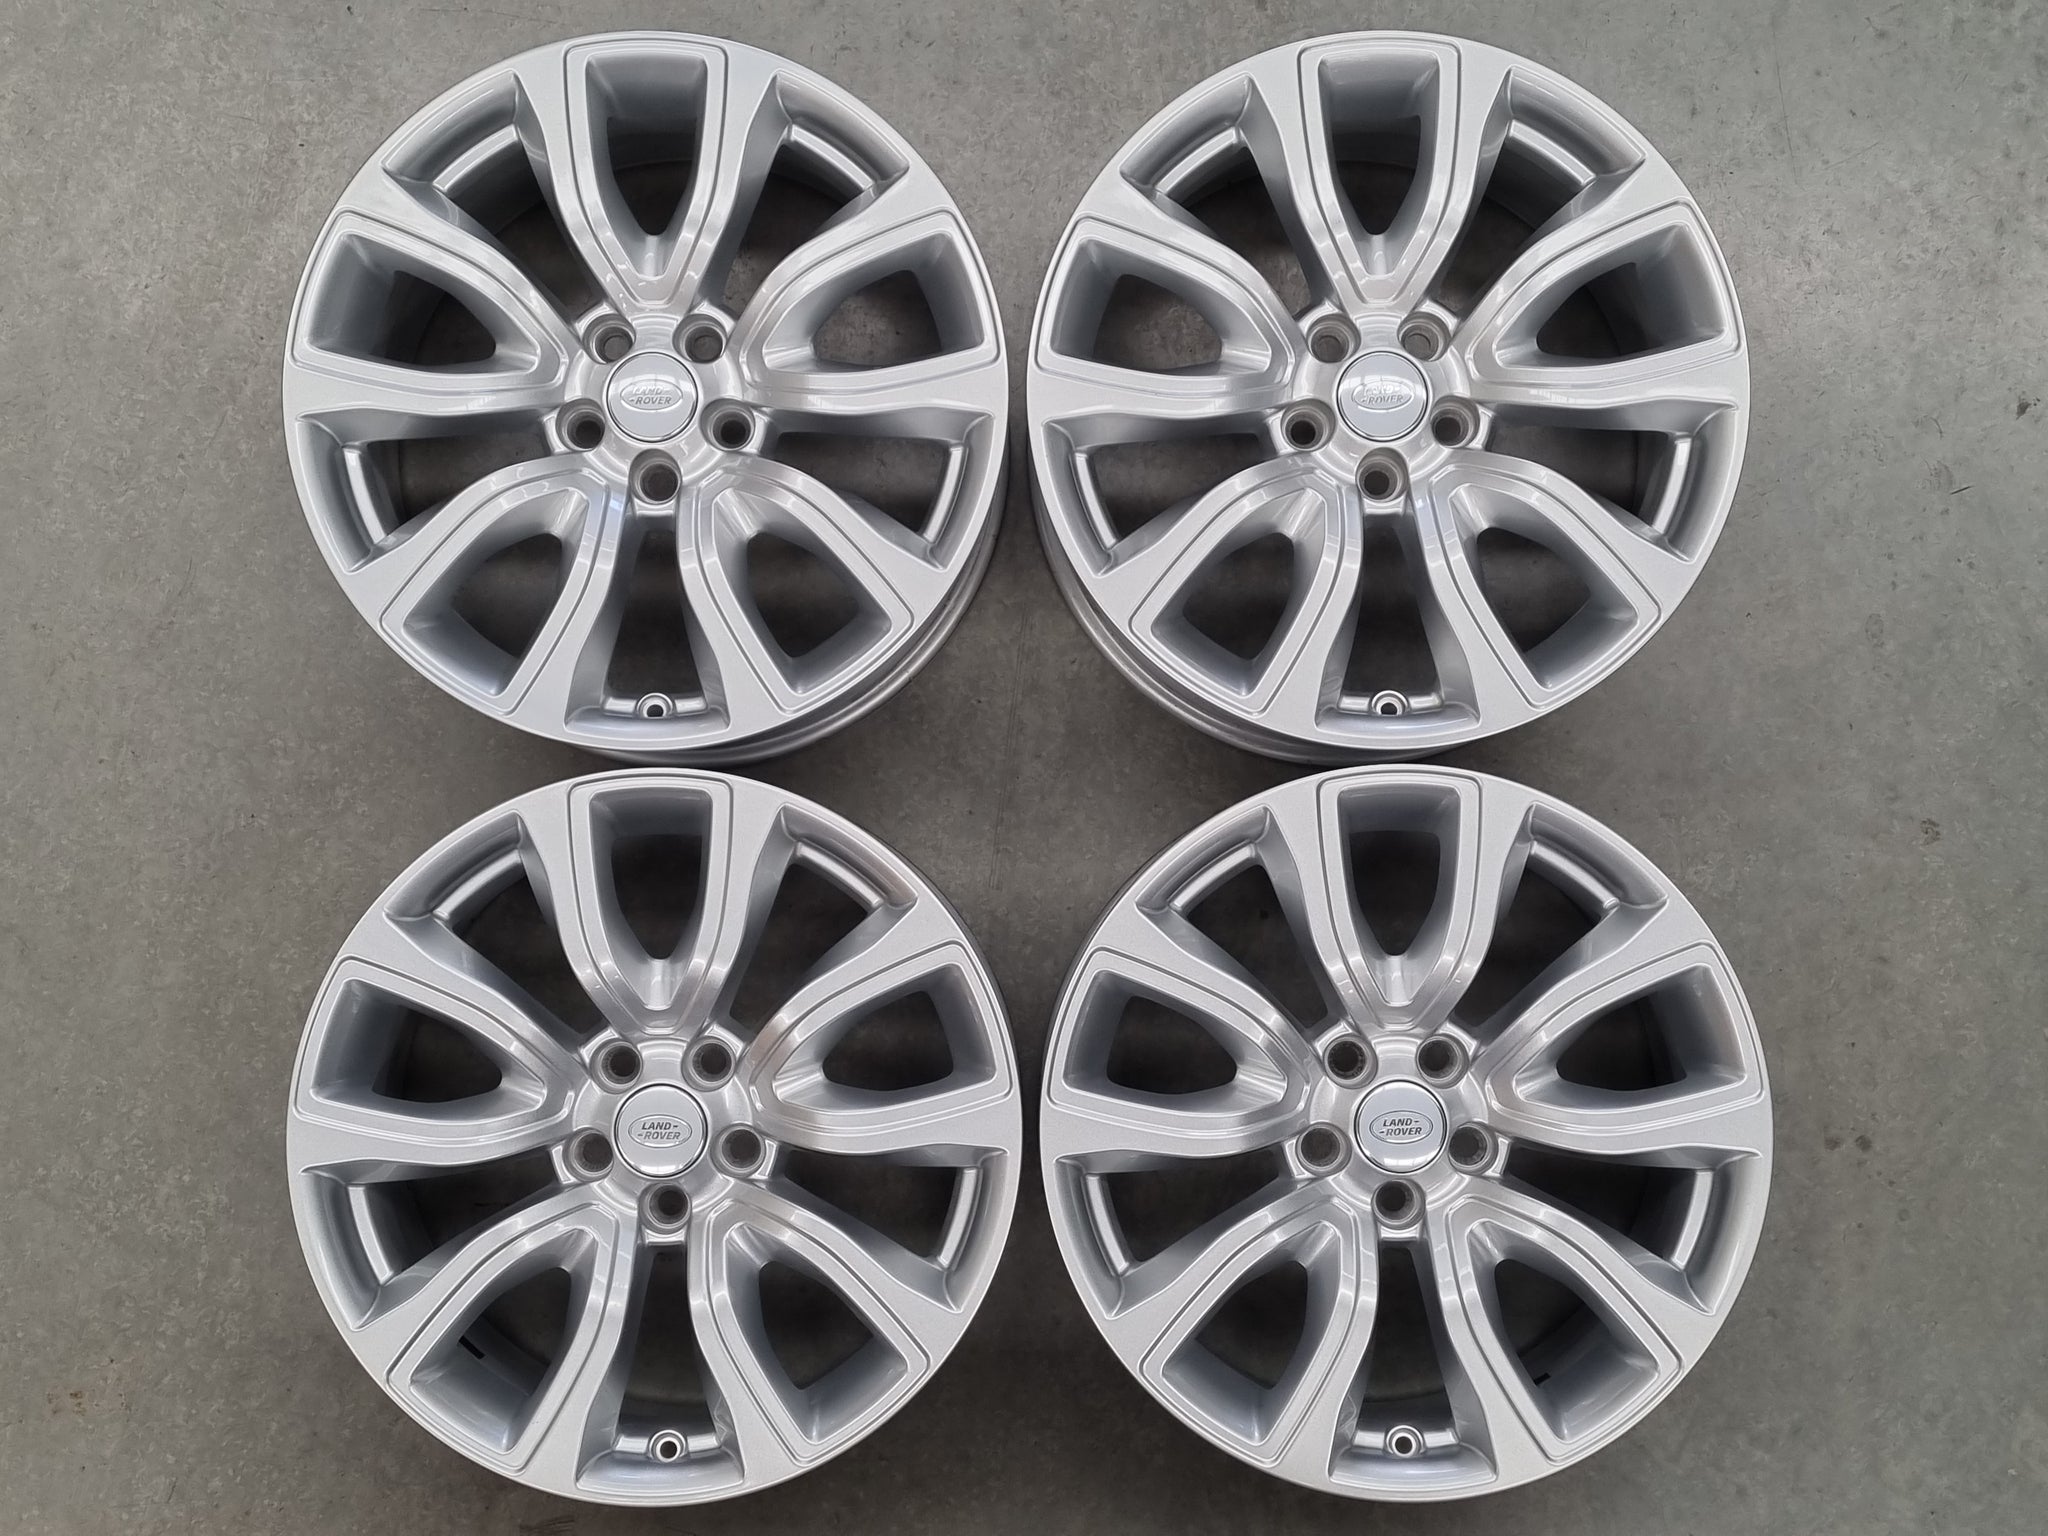 Load image into Gallery viewer, Genuine Range Rover Evoque EJ32 18 Inch Alloy Wheels Set of 4
